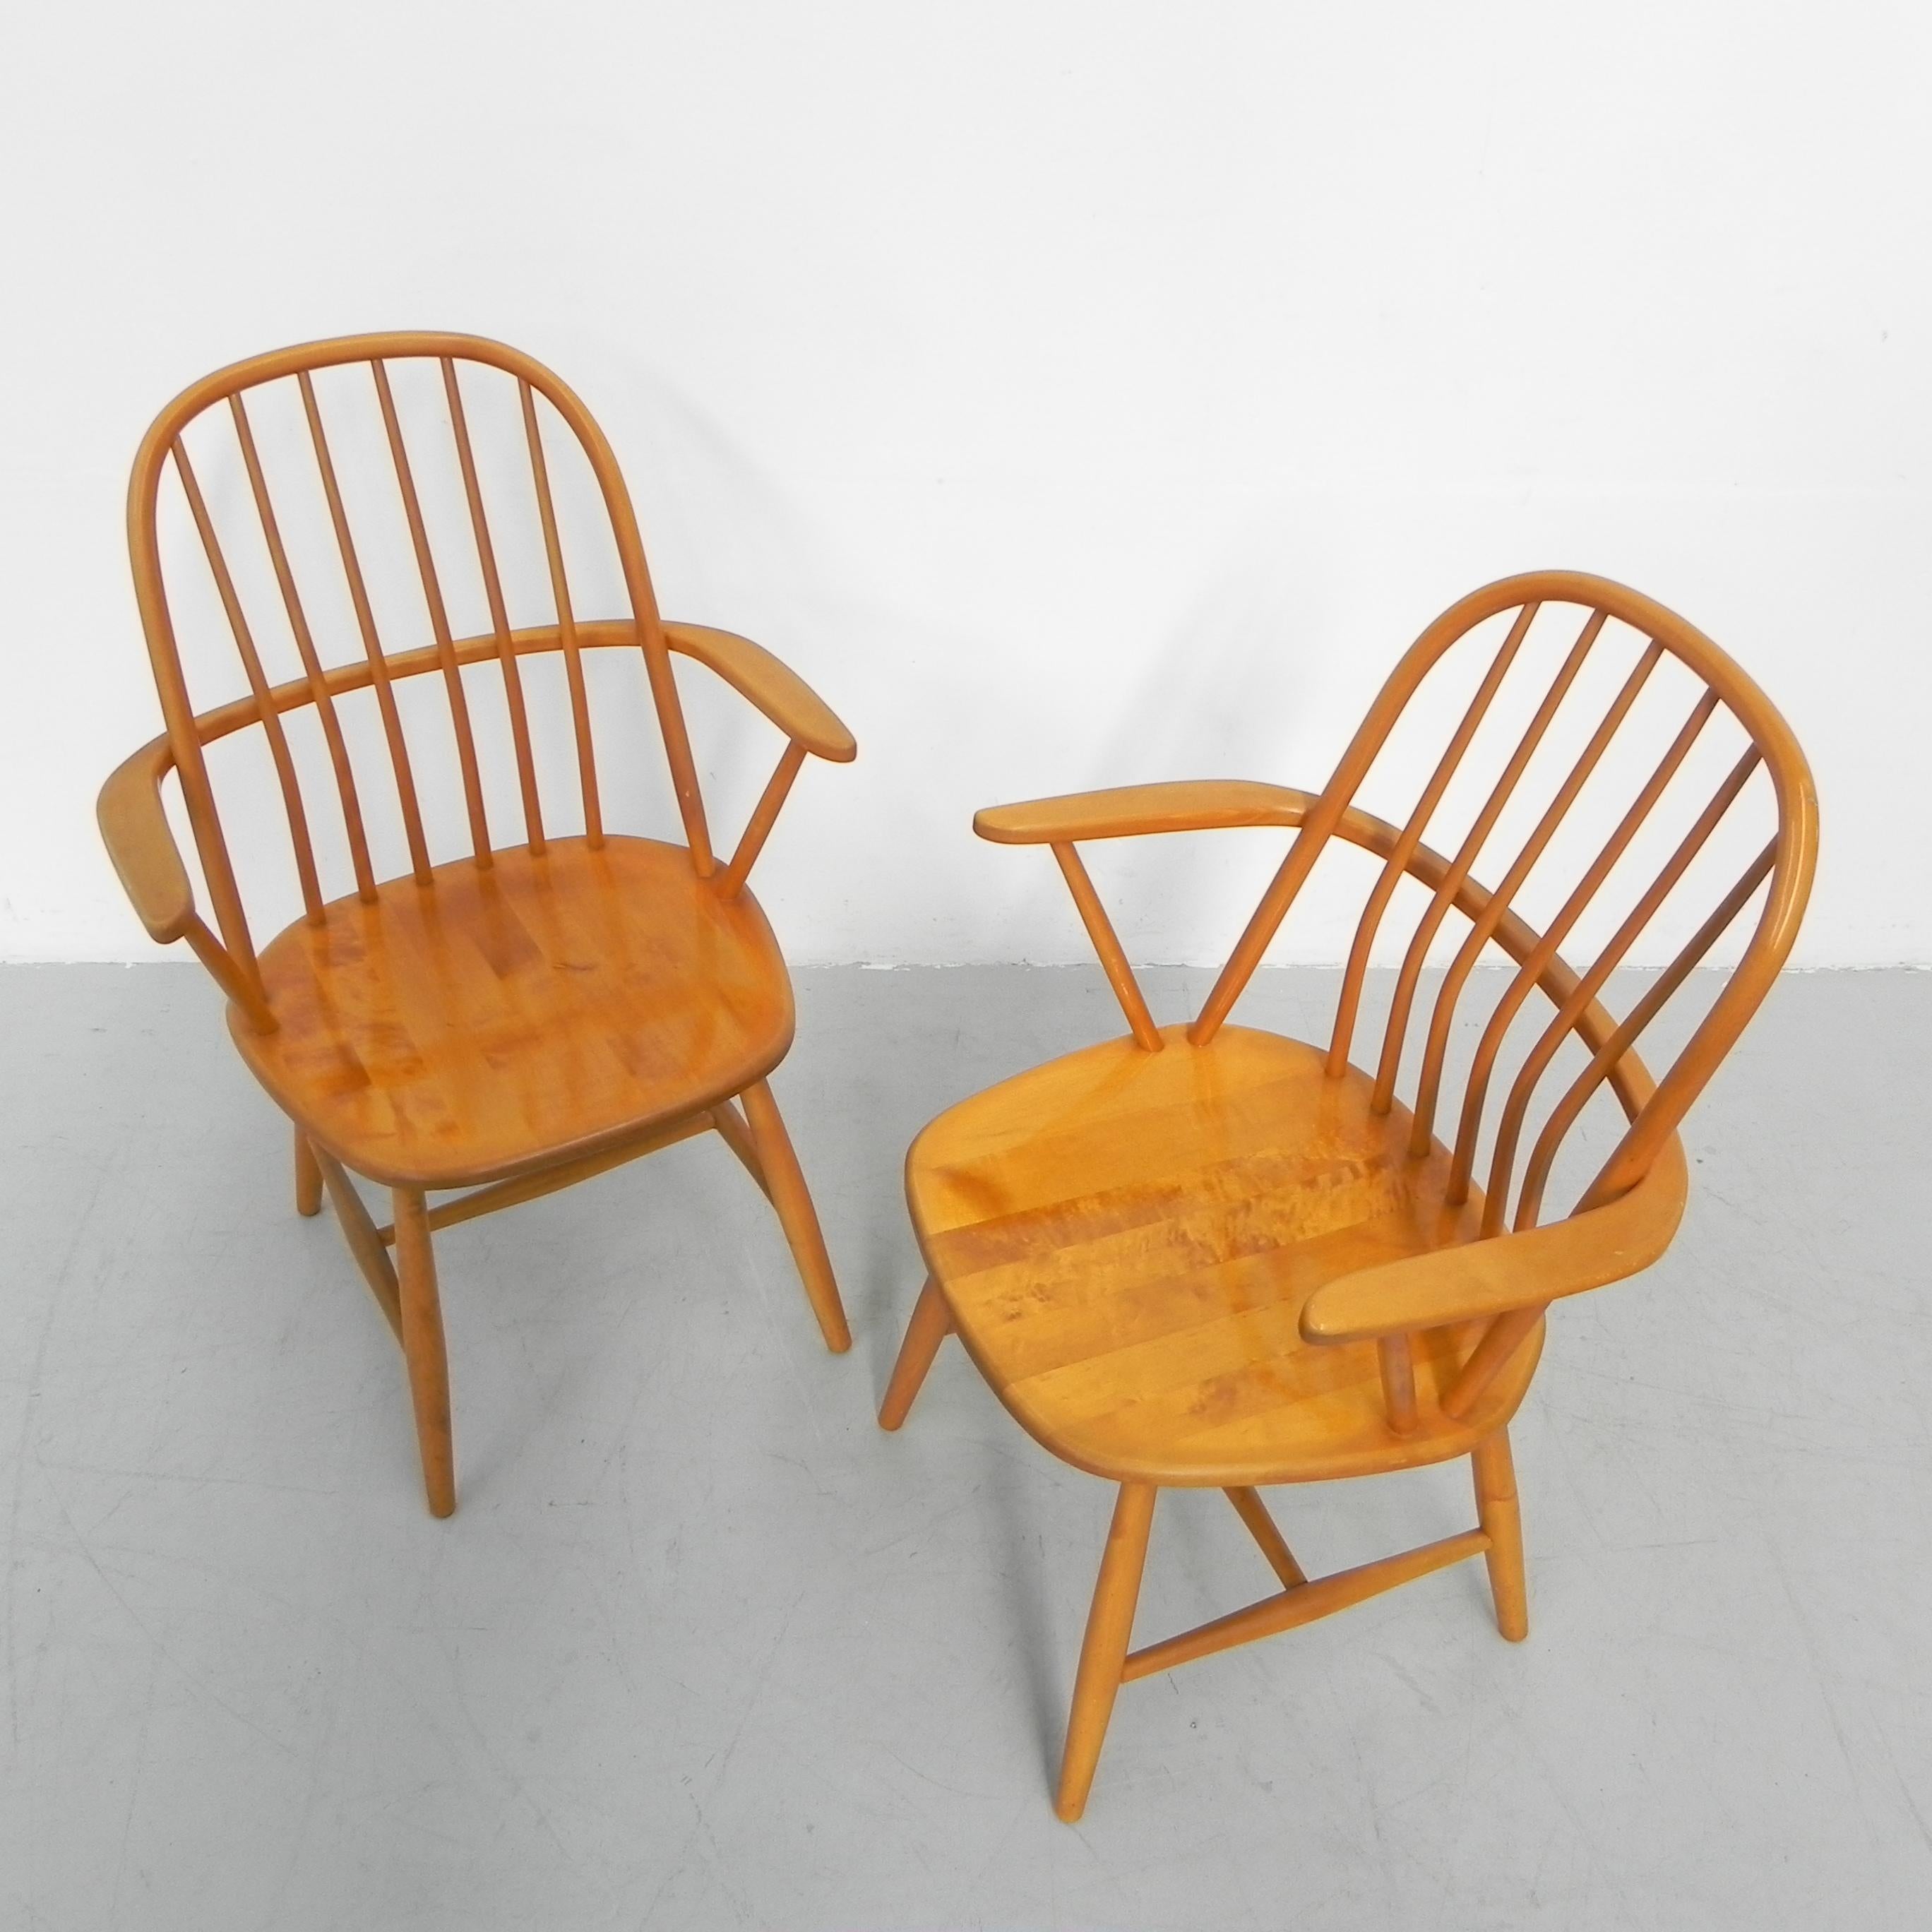 These chairs are designed and produced by Bengt Akerblom
by Nassjo Stolen Fabrik (Later Nesto) in the early 1950s.

Height: 89 cm.
Seat height: 42 cm.
Width: 60 cm.
Depth: 56 cm.
Origin: Sweden, 1950s.
Material: birch.